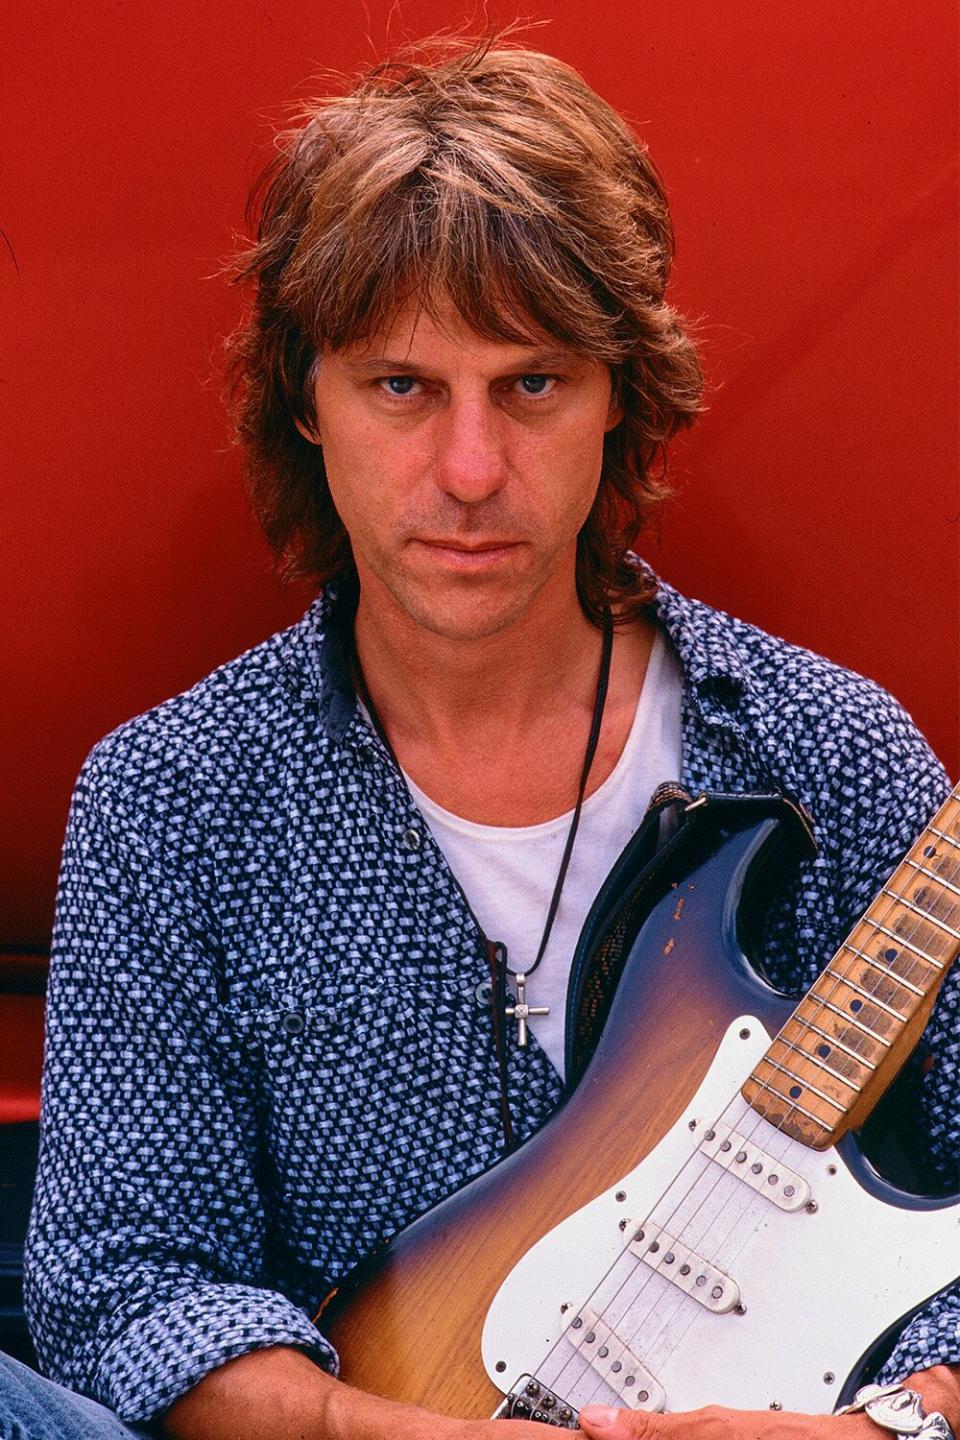 English Rock musician Jeff Beck at his home studio, Surrey, England, September 1989. (Photo by Steve Rapport/Getty Images)